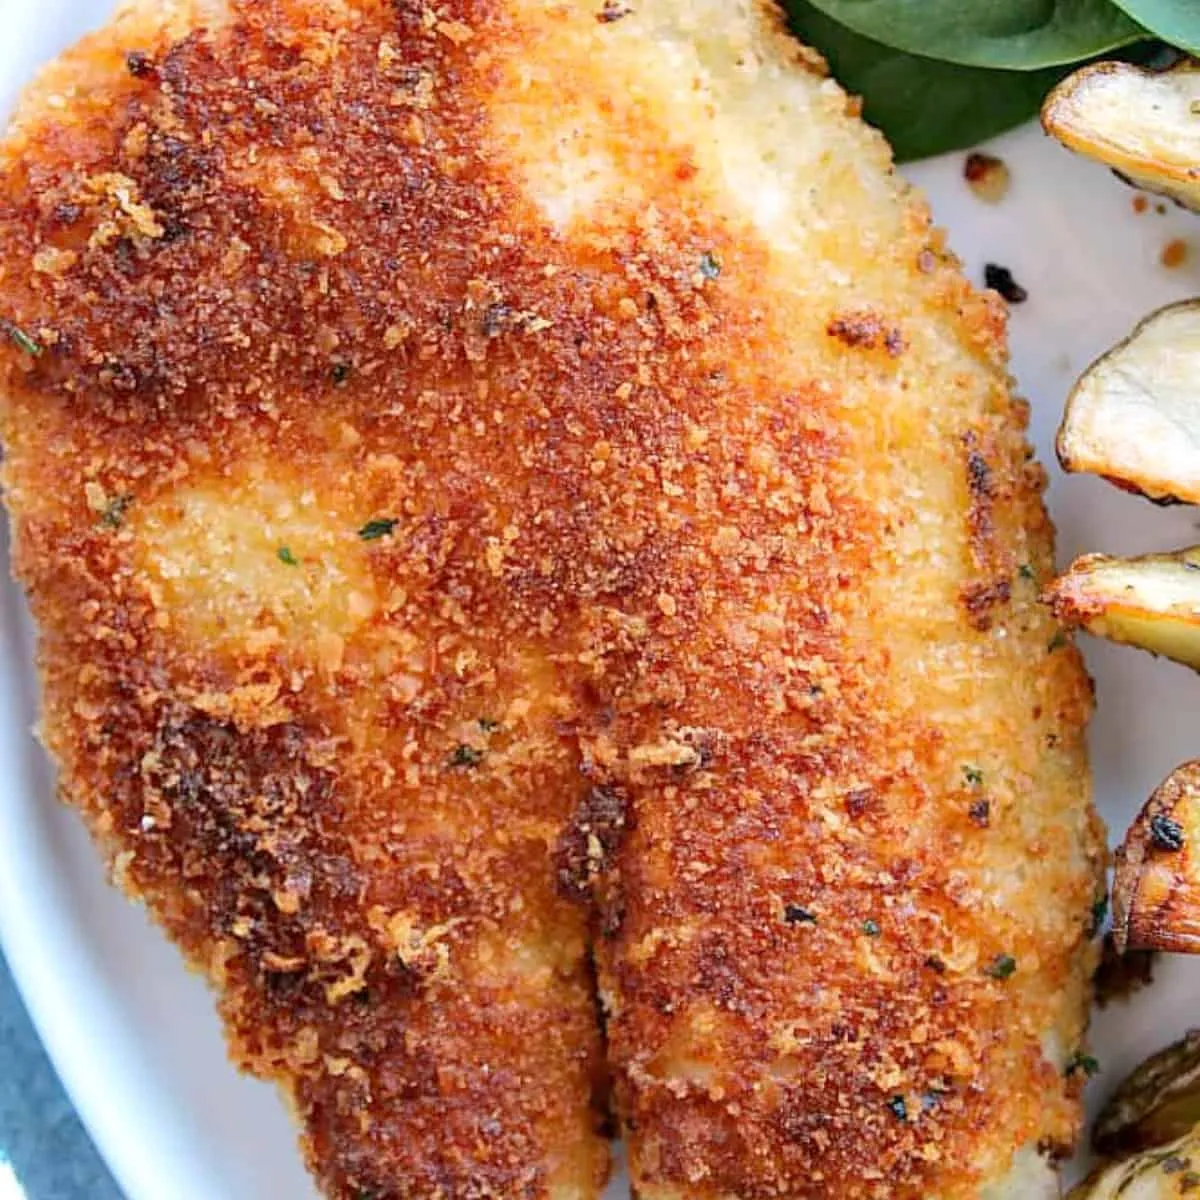 Crispy-Coated Tilapia Recipe for Solo Dinners or More